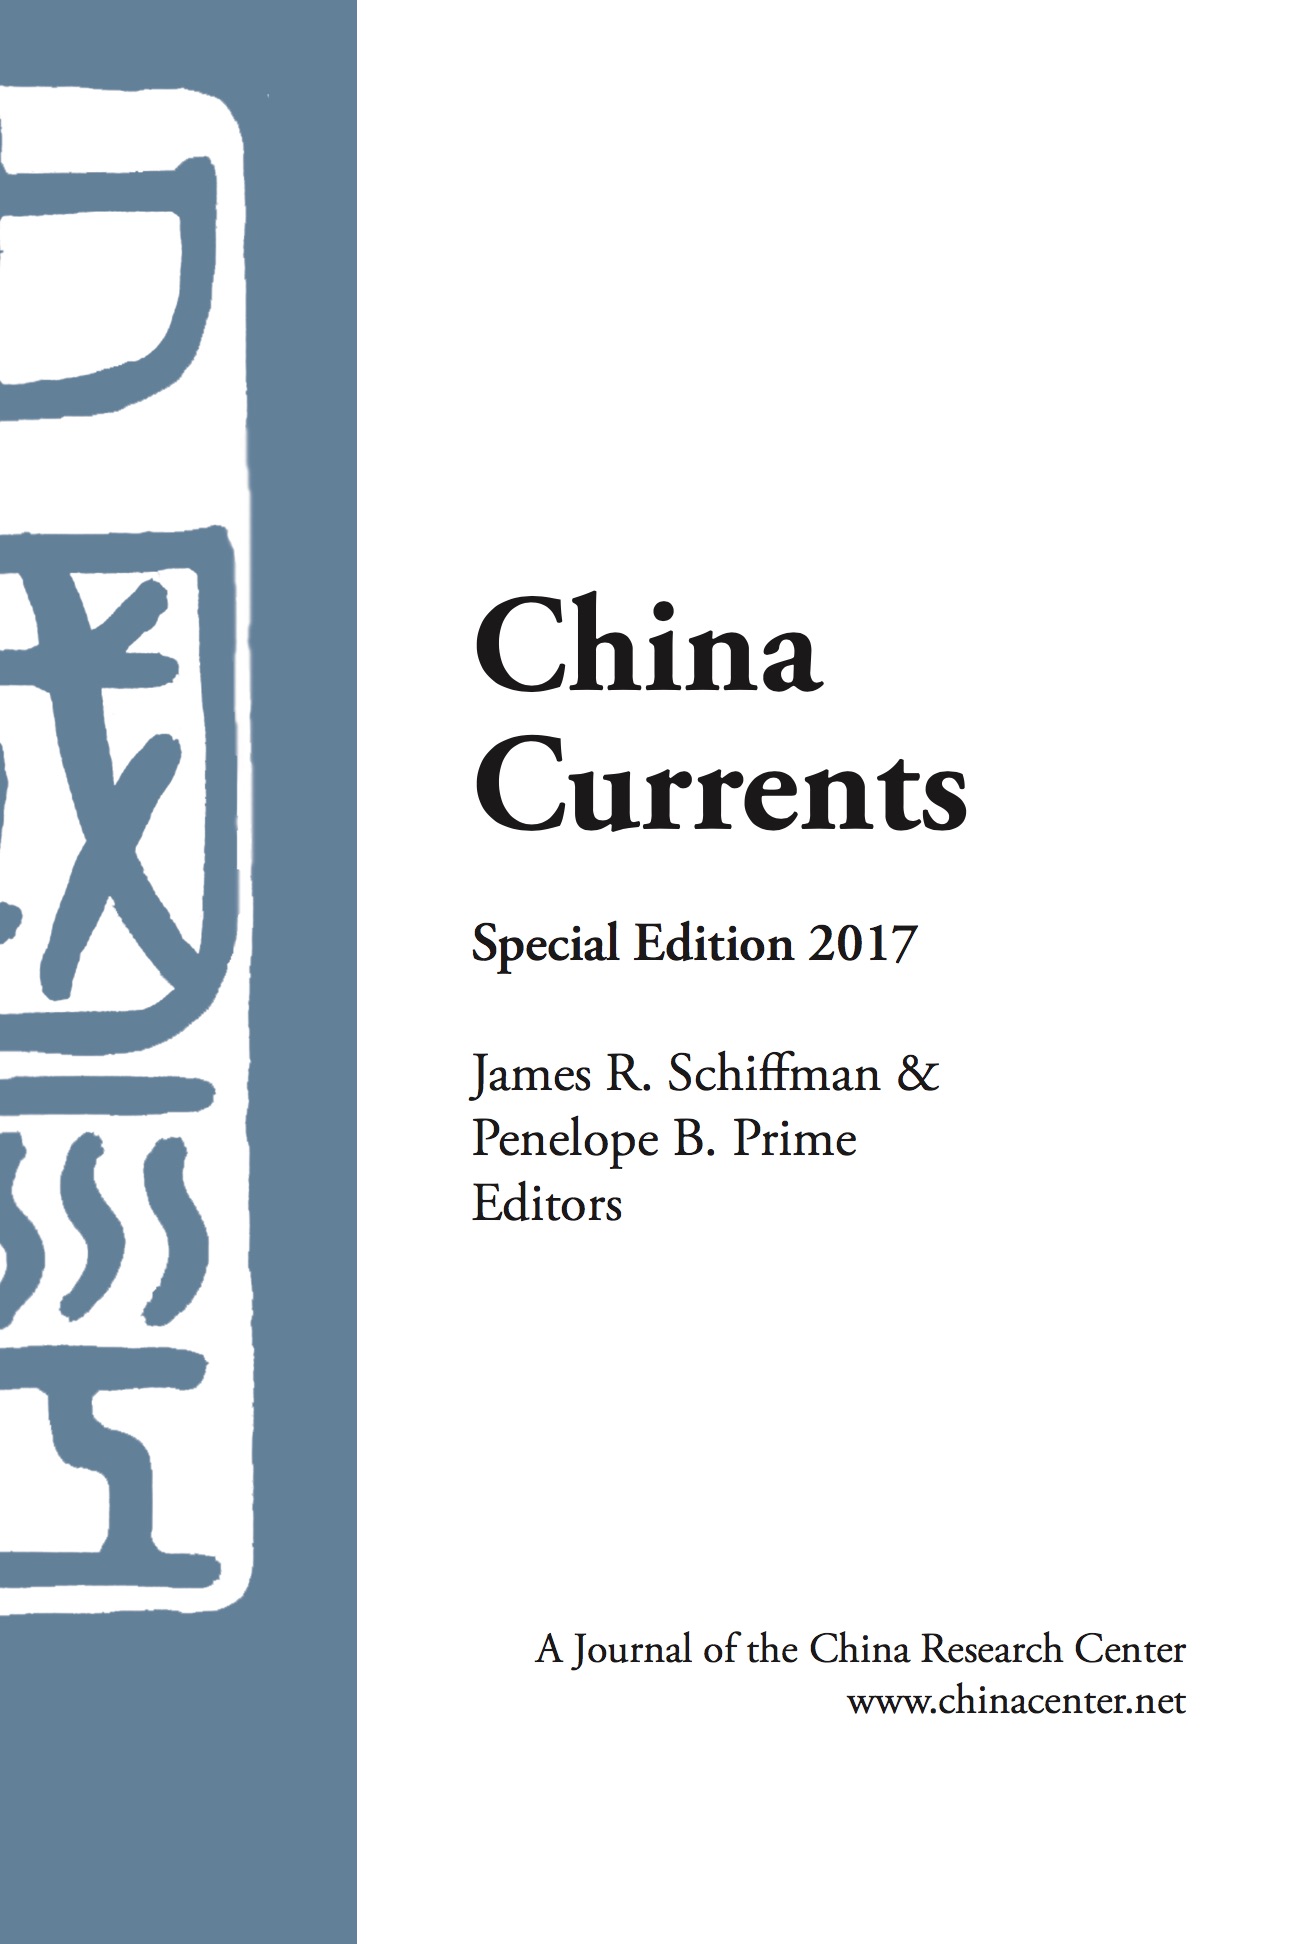 China Currents Special Edition 2017 is Published